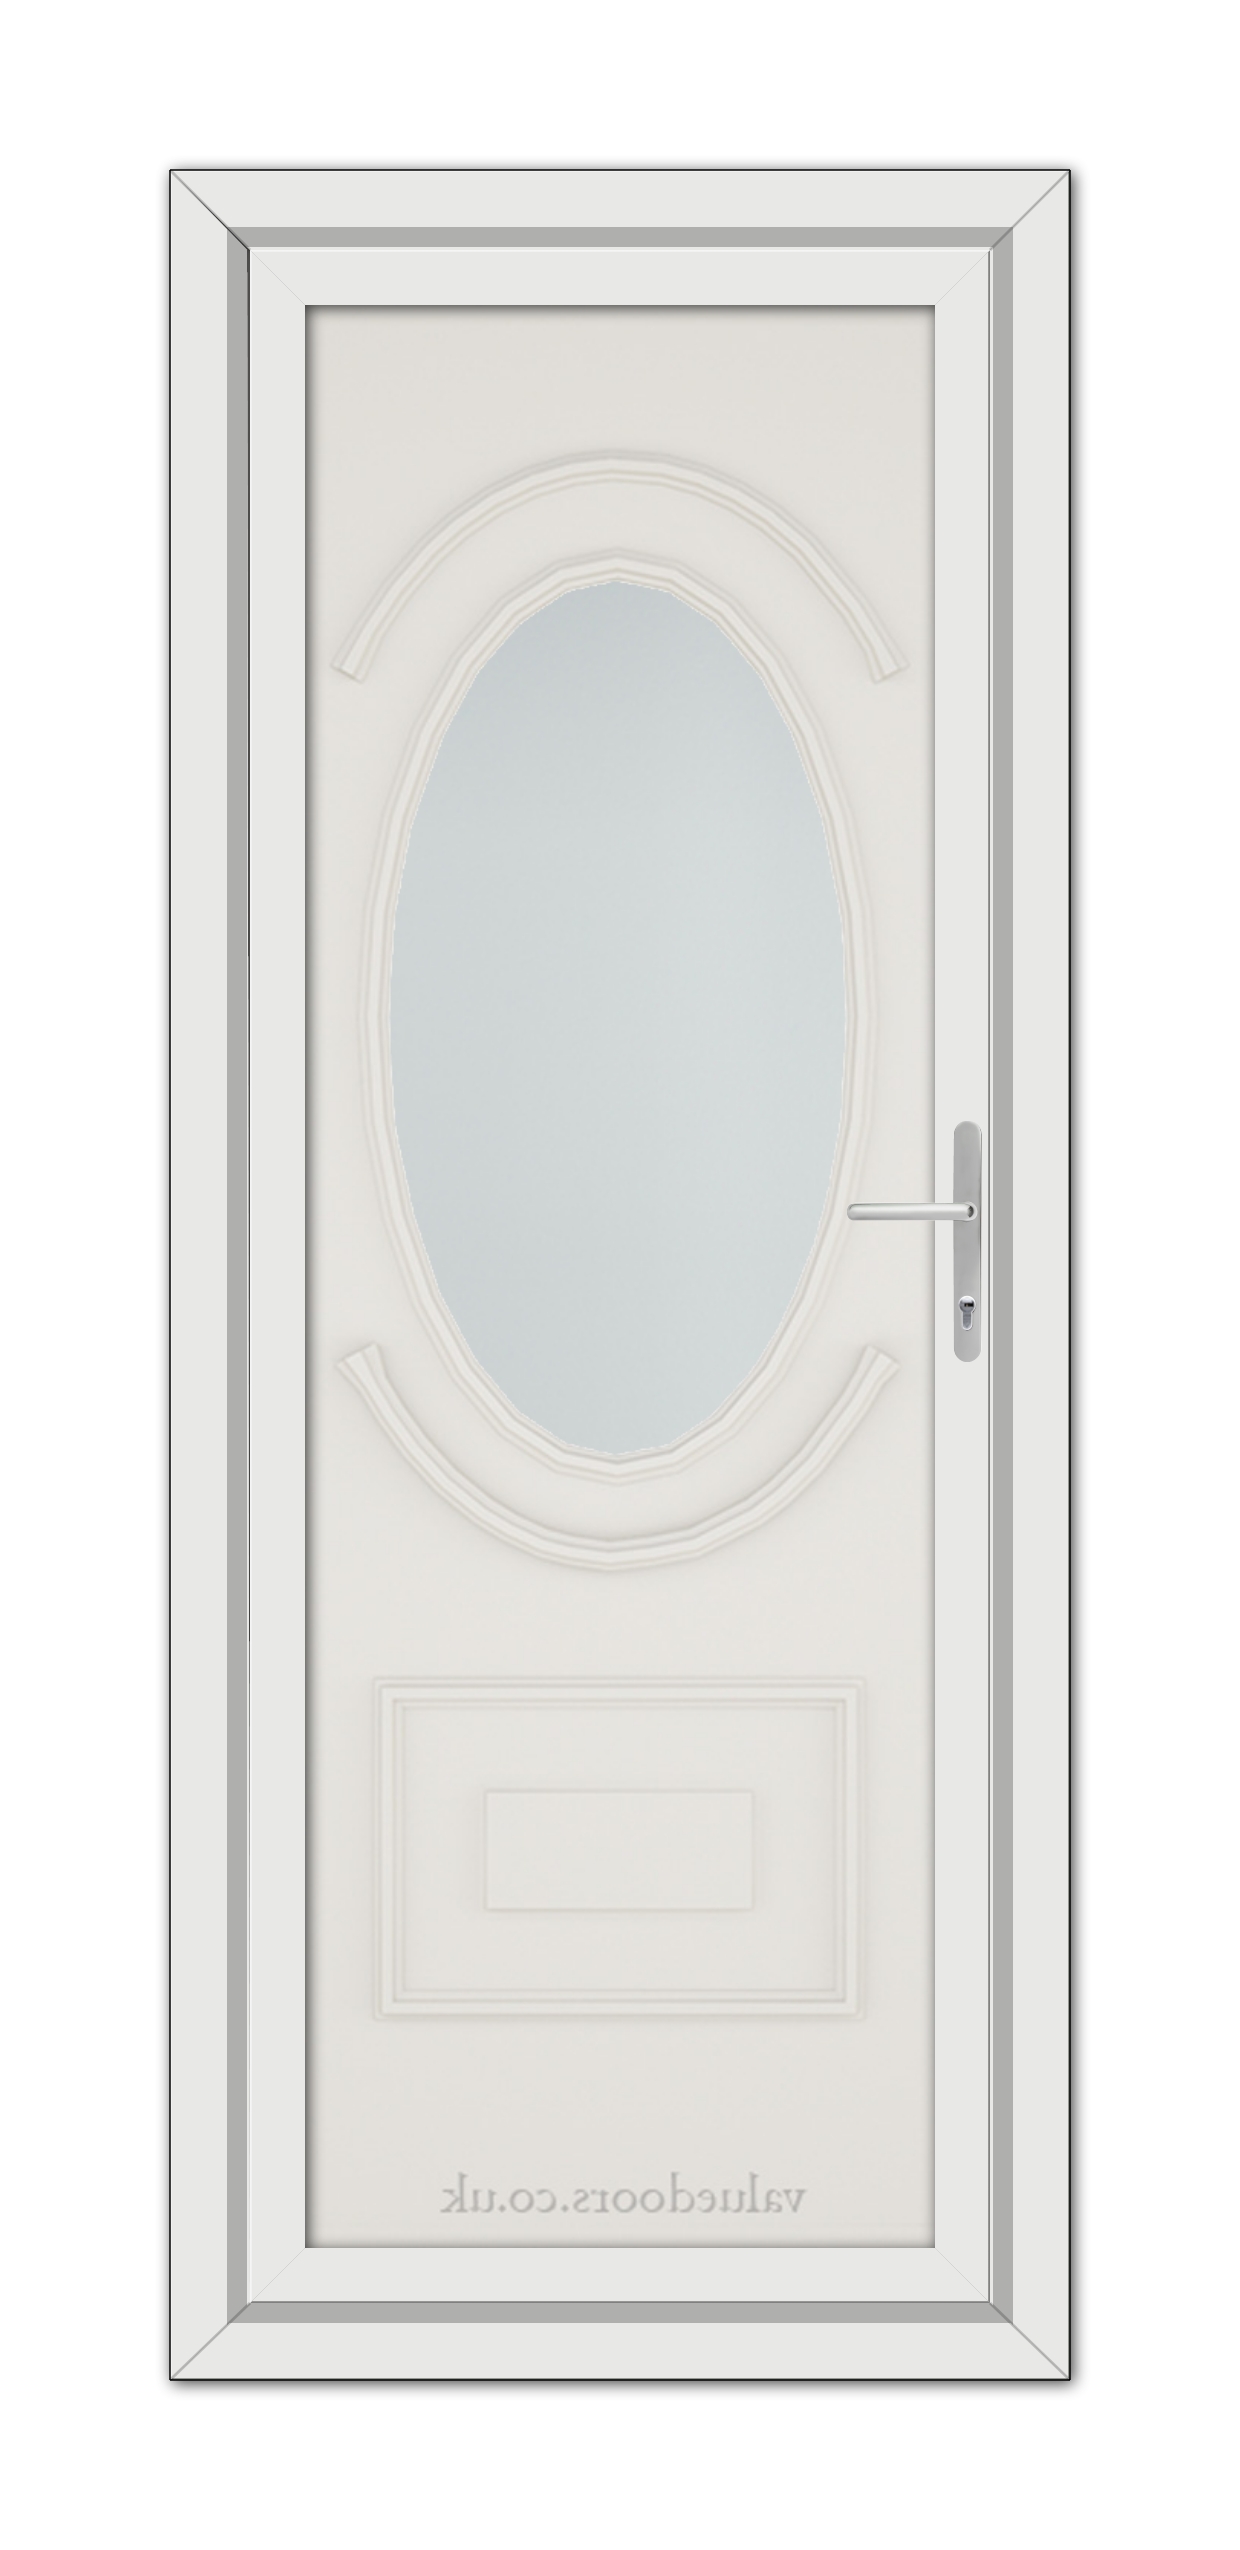 White Cream Richmond uPVC Door with an oval glass panel, a handle on the right side, and decorative molding.